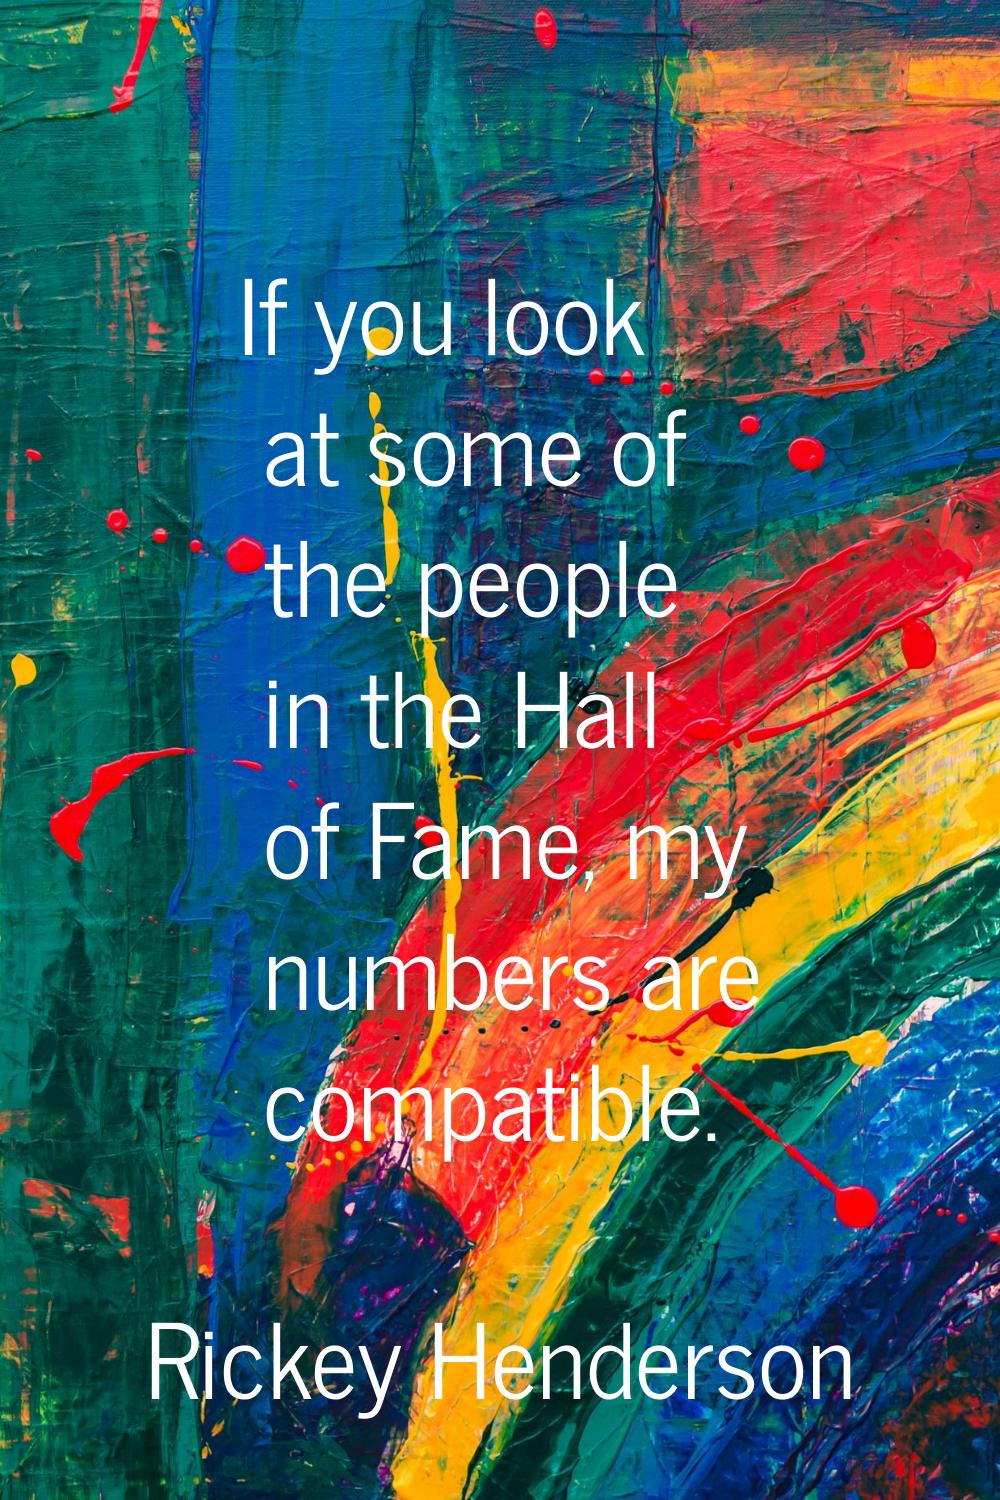 If you look at some of the people in the Hall of Fame, my numbers are compatible.